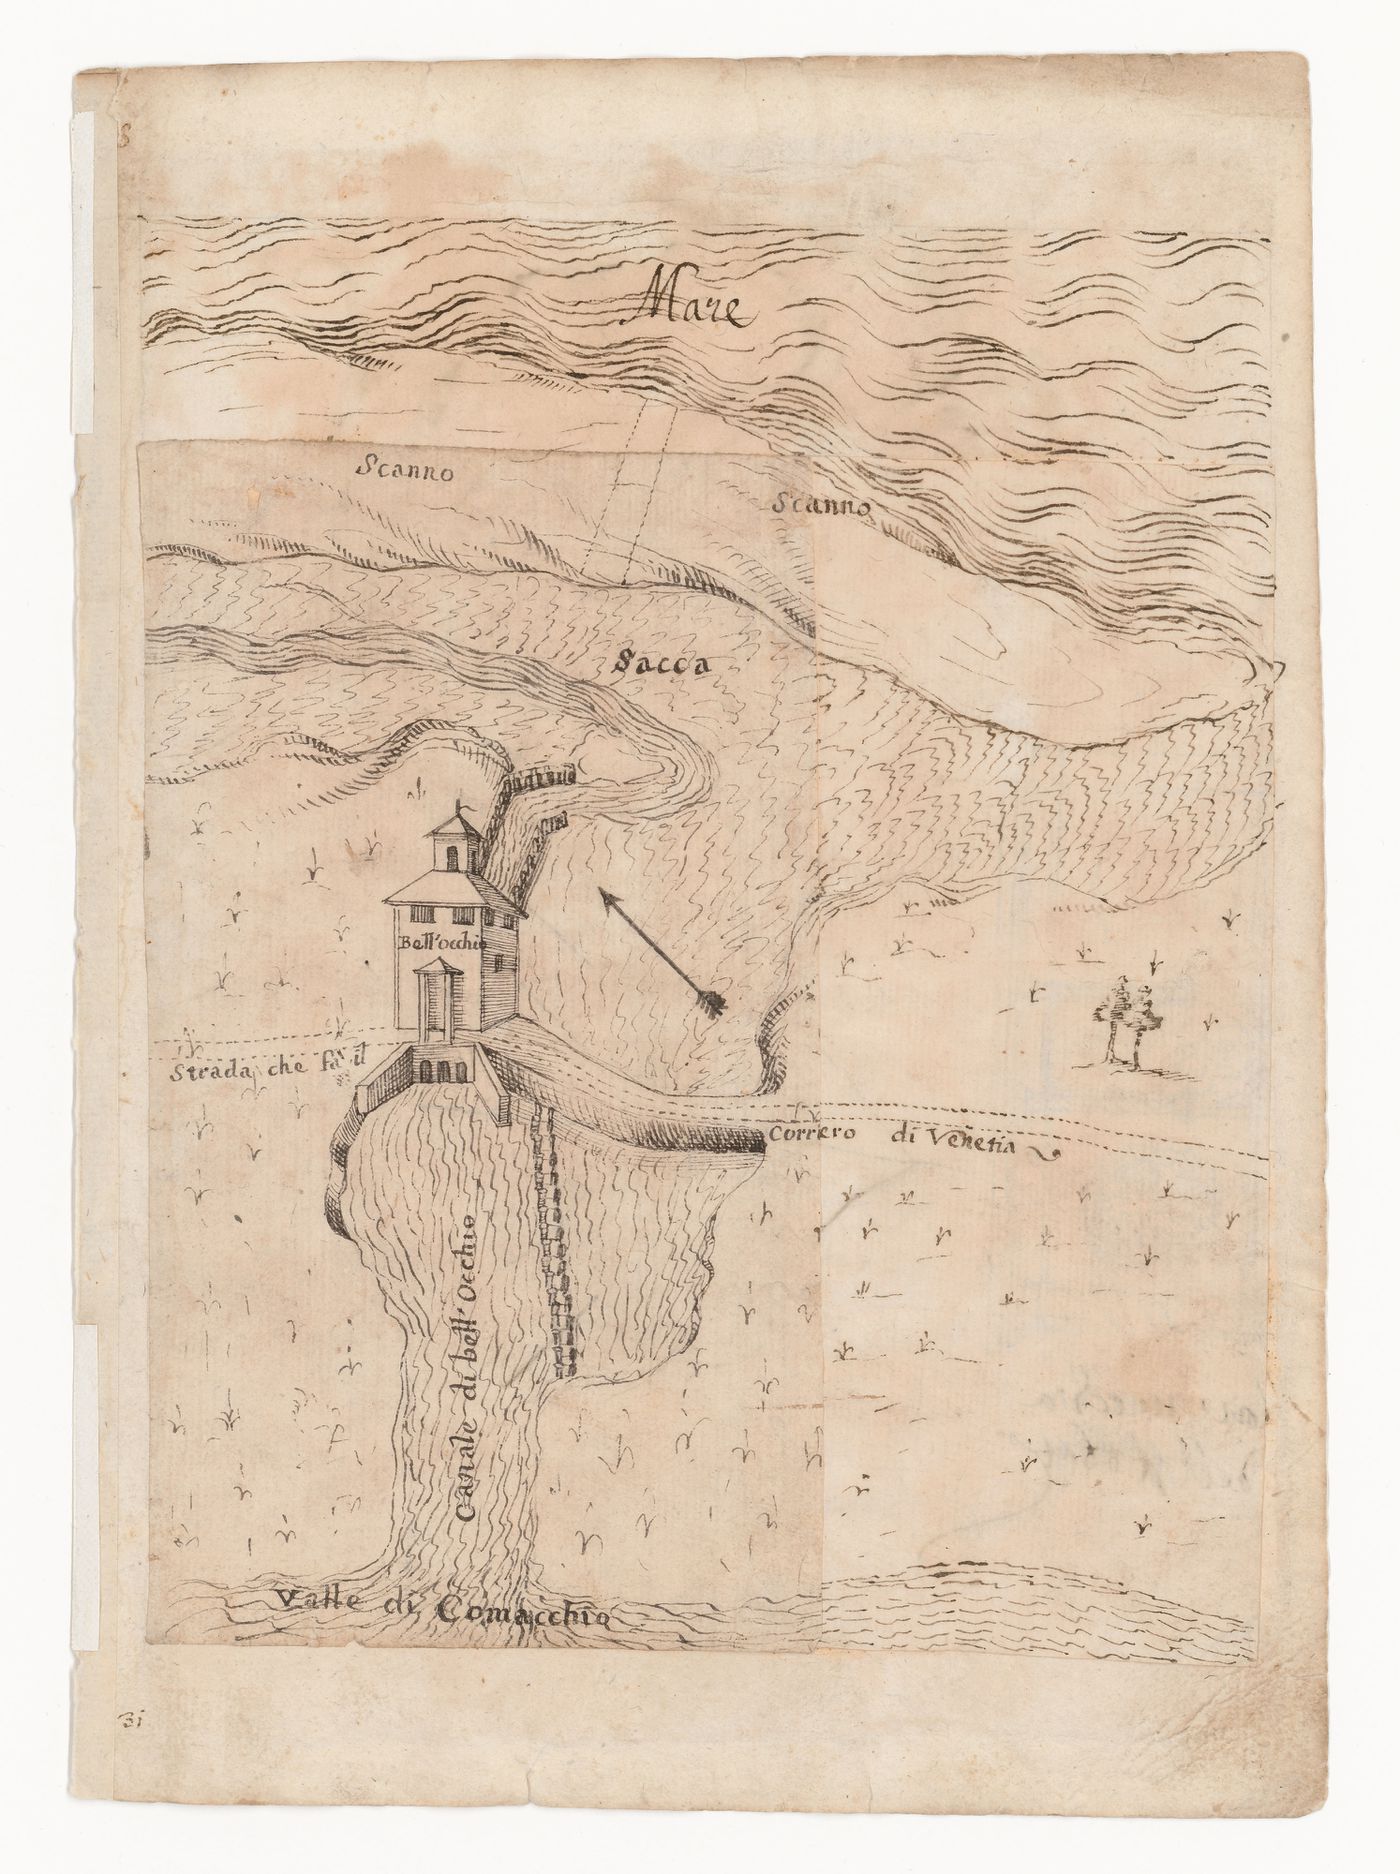 Bird's-eye view of the area around the Valle di Comacchio; verso of sheet laid down on right: Sketch of a monument with a sculpture in a niche flanked by columns; verso of leaf: Floral design for the top of a crosier